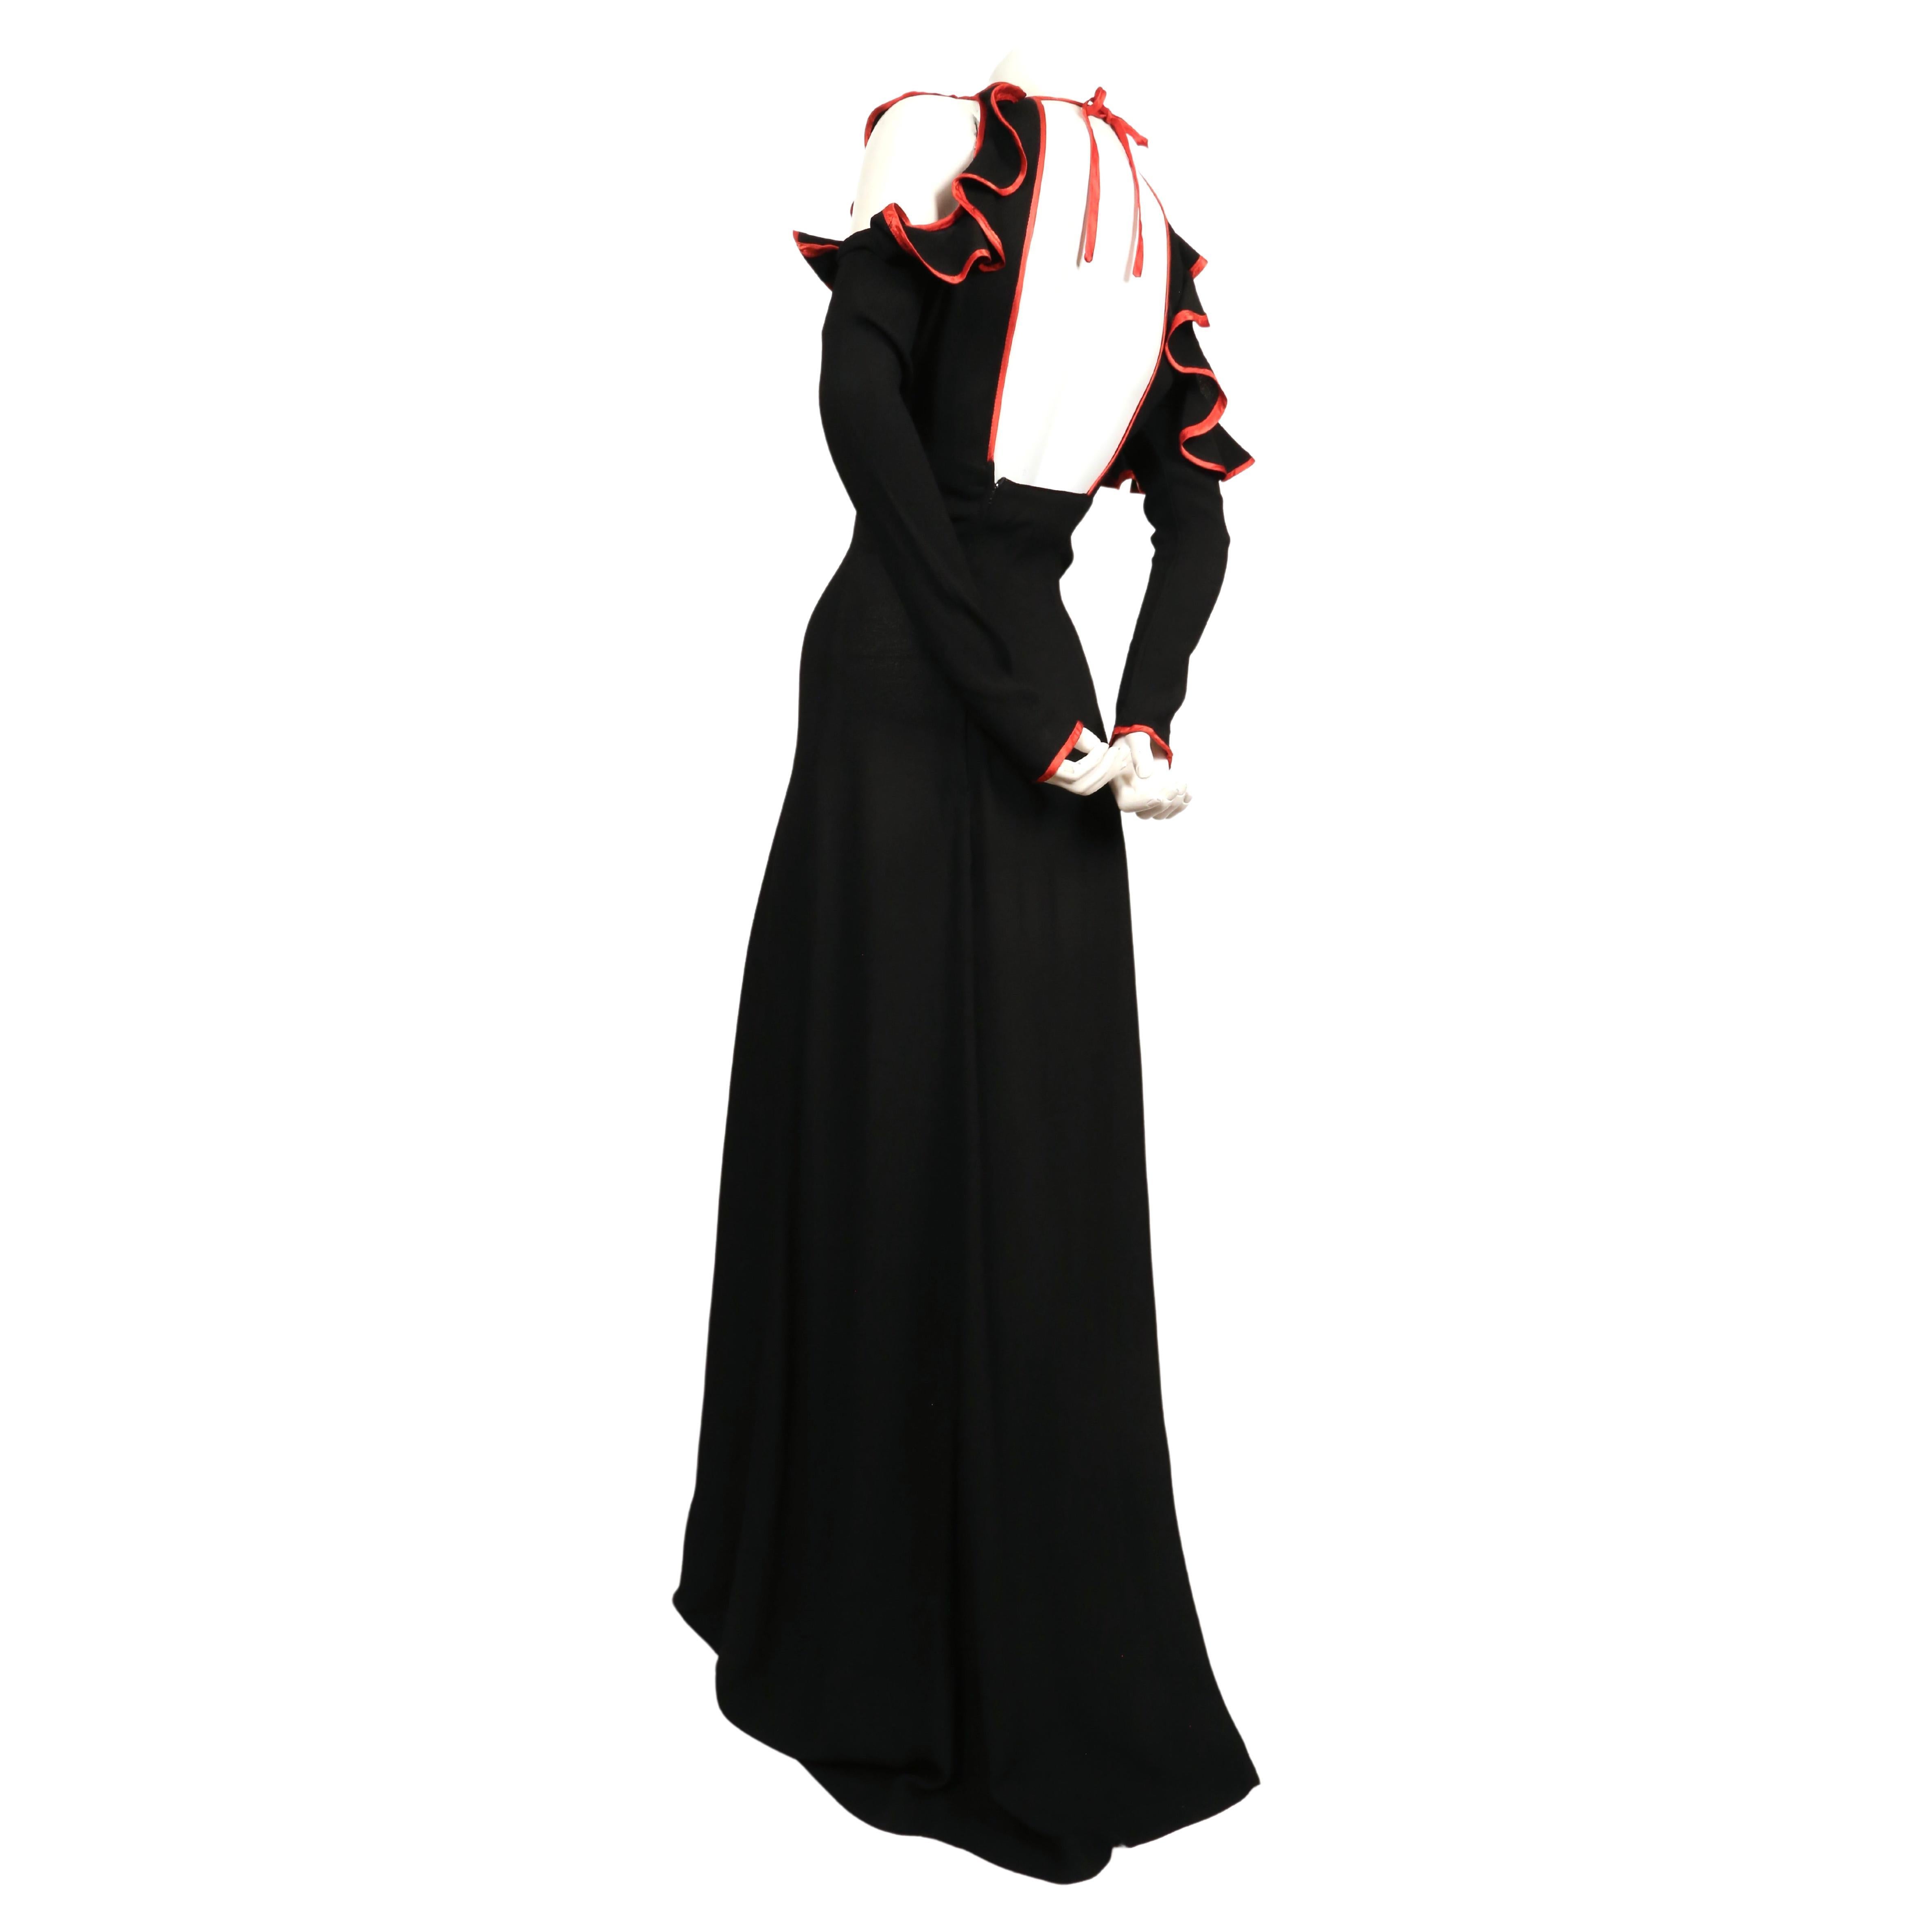 1968 OSSIE CLARK black moss crepe dress with keyhole neckline ruffles & red trim For Sale 1